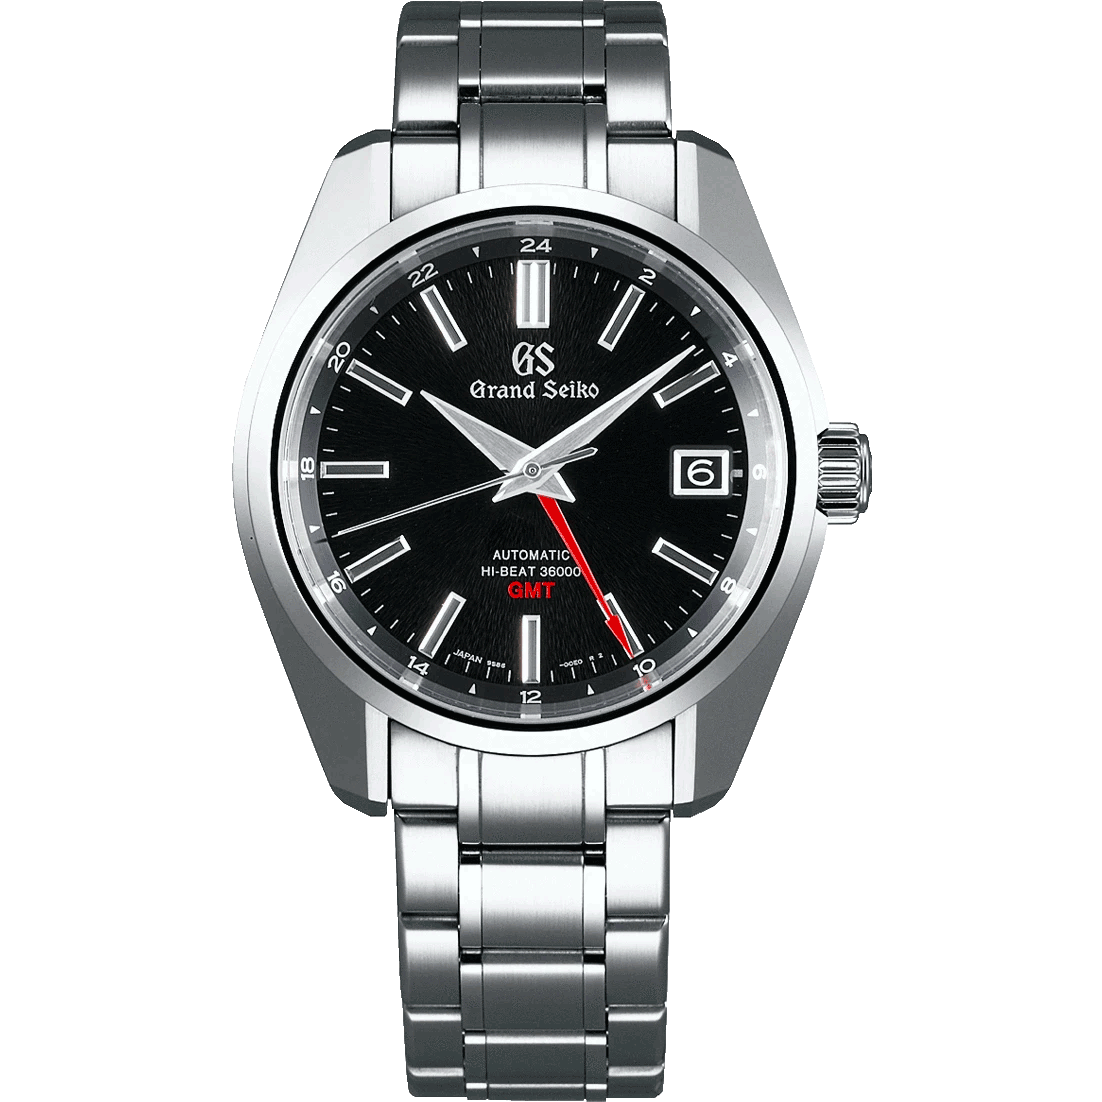 Grand Seiko Hi Beat 36000 GMT Automatic Black Mt. Iwate Dial 44GS Case Stainless Steel 9S86 SBGJ203 